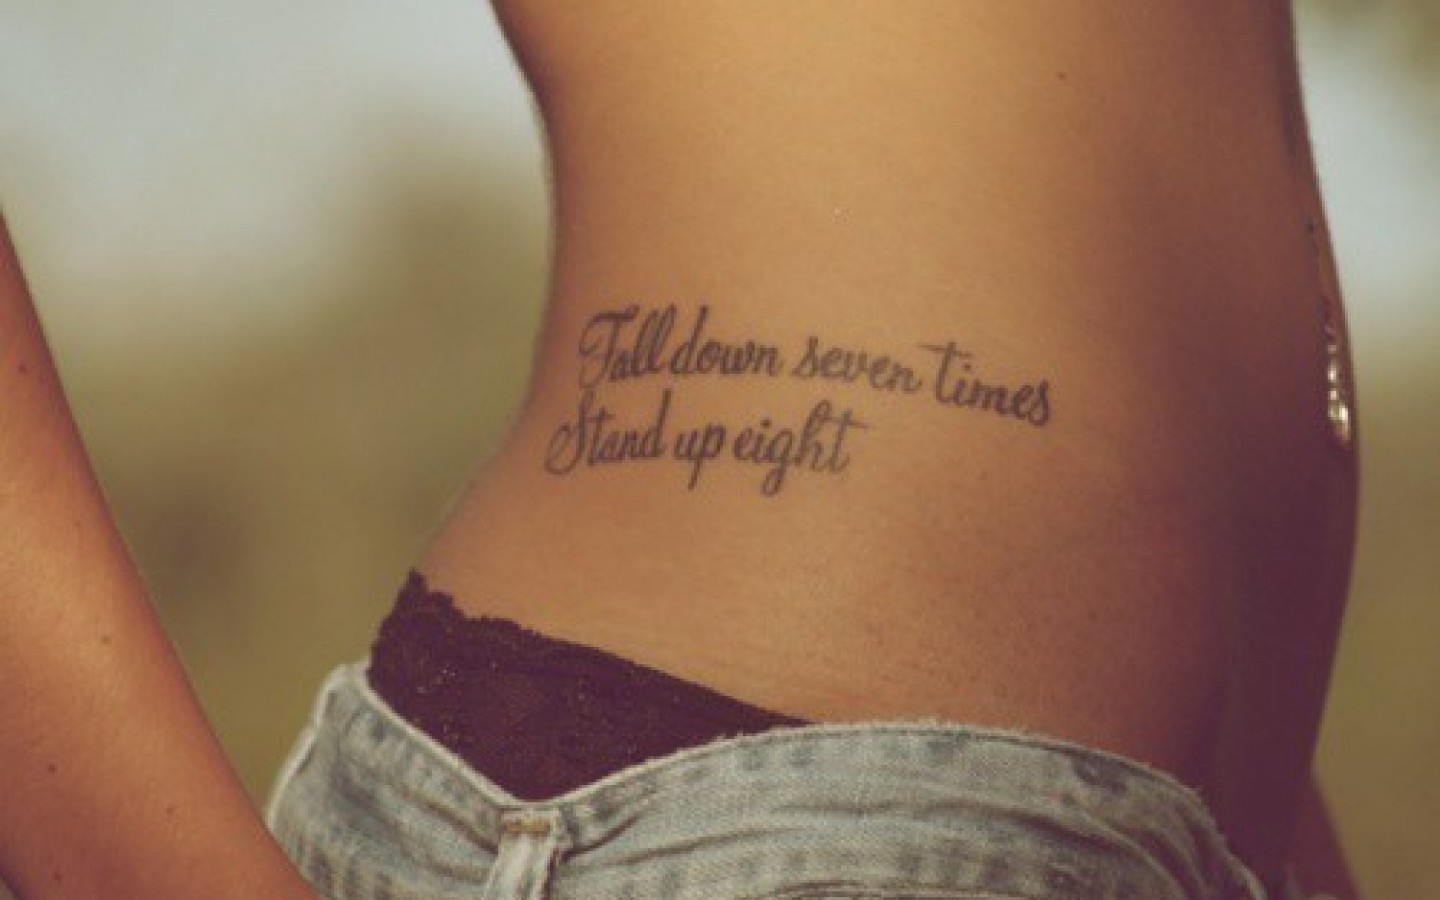 Inspirational Tattoos Designs, Ideas and Meaning | Tattoos For You